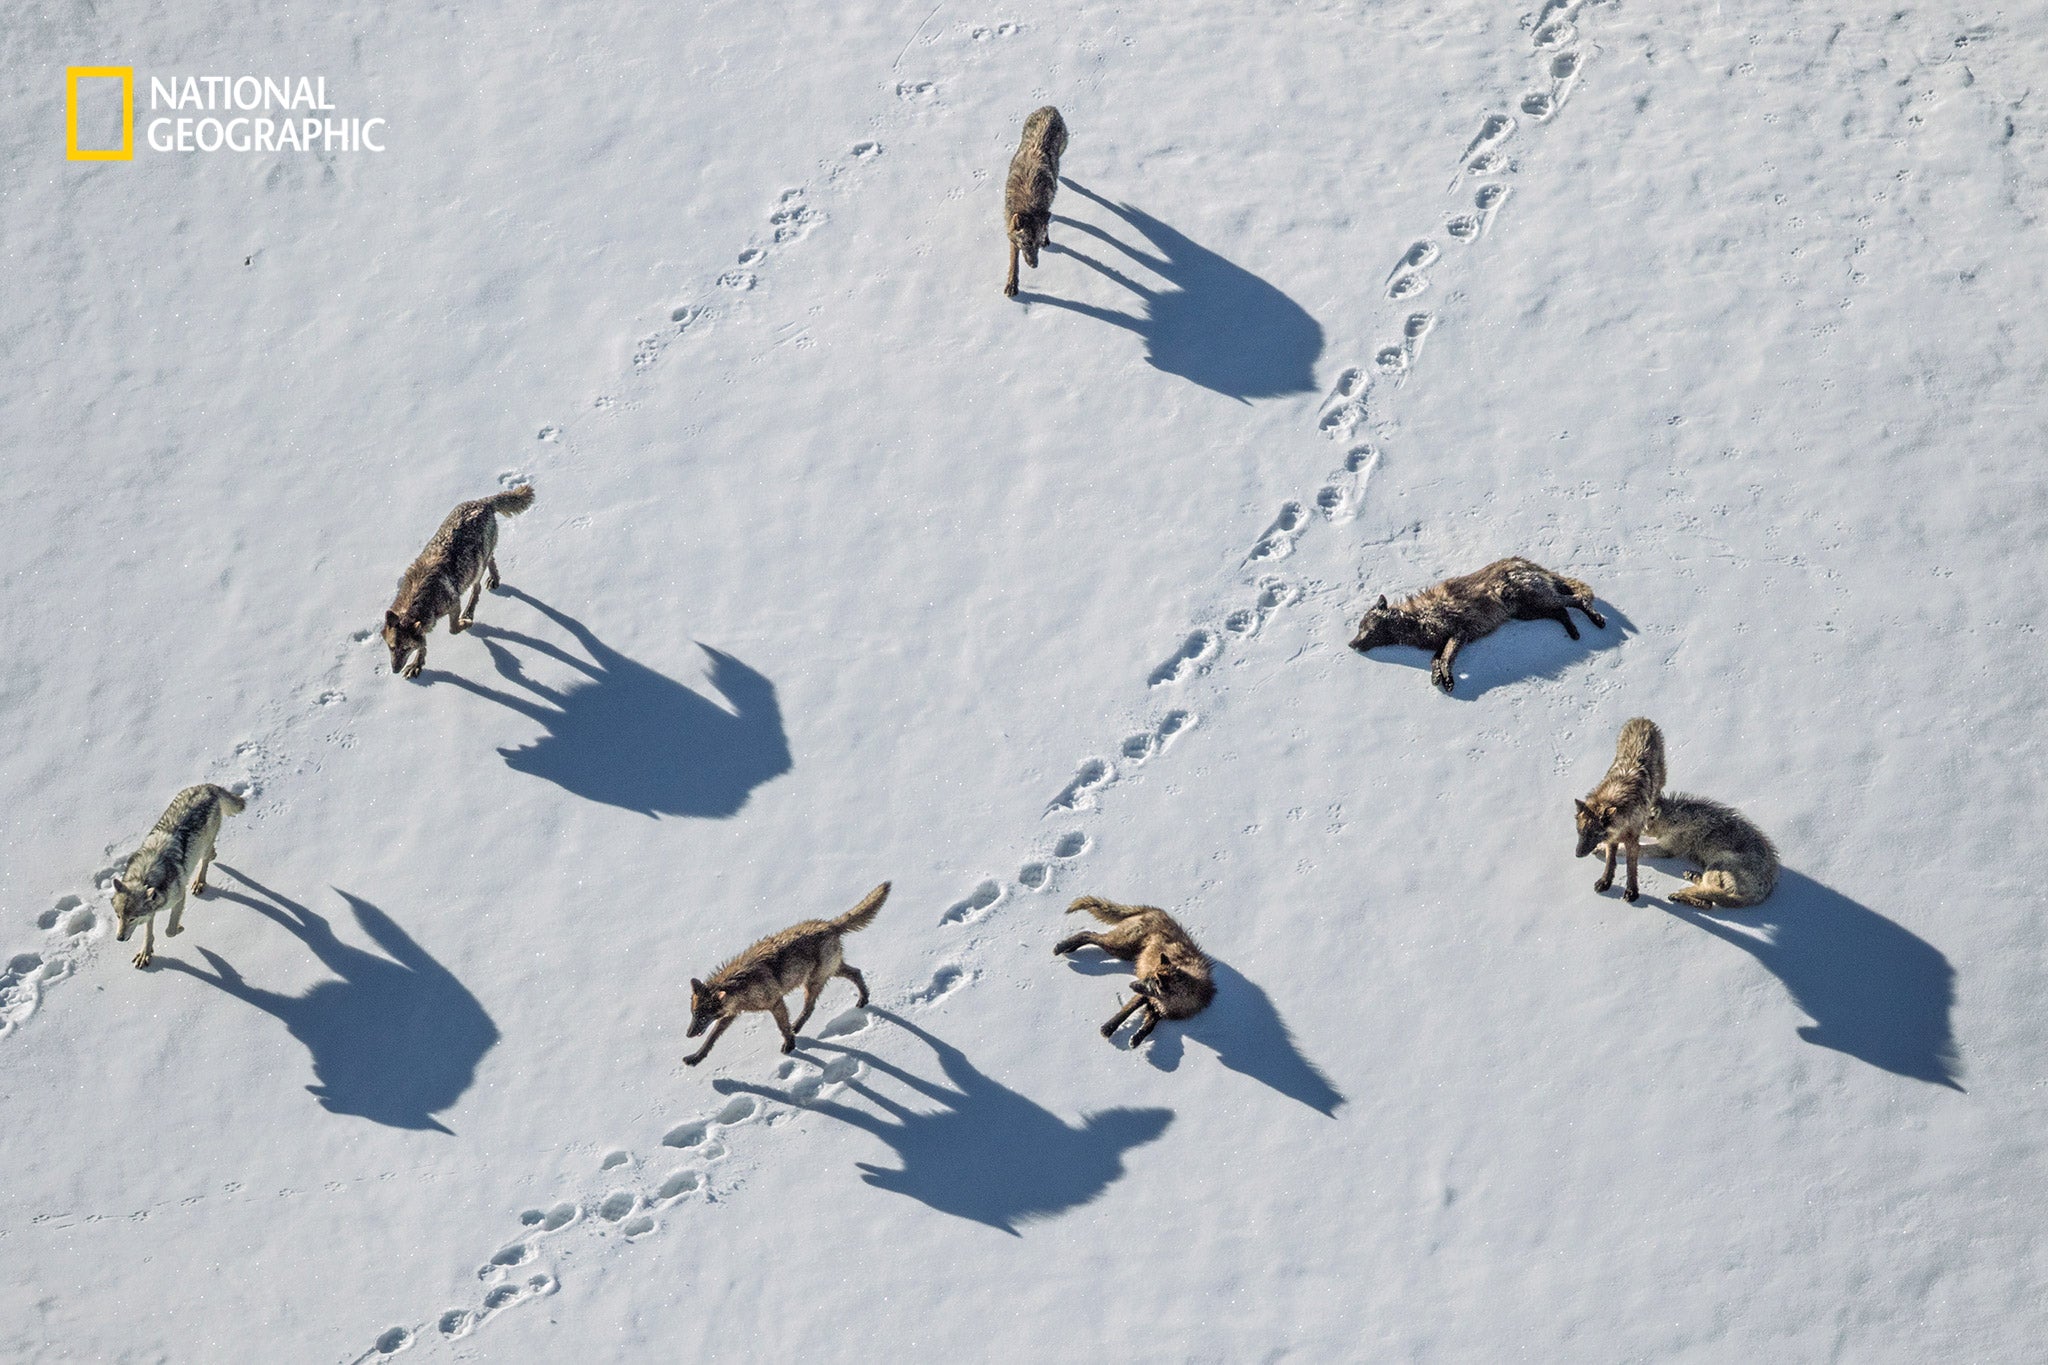 Gray wolves investigate grizzly bear tracks in Yellowstone's Pelican Valley.  Once an endangered species, wolves were reintroduced to the area in the mid-1990s, as of late 2021 95 live in the park. 